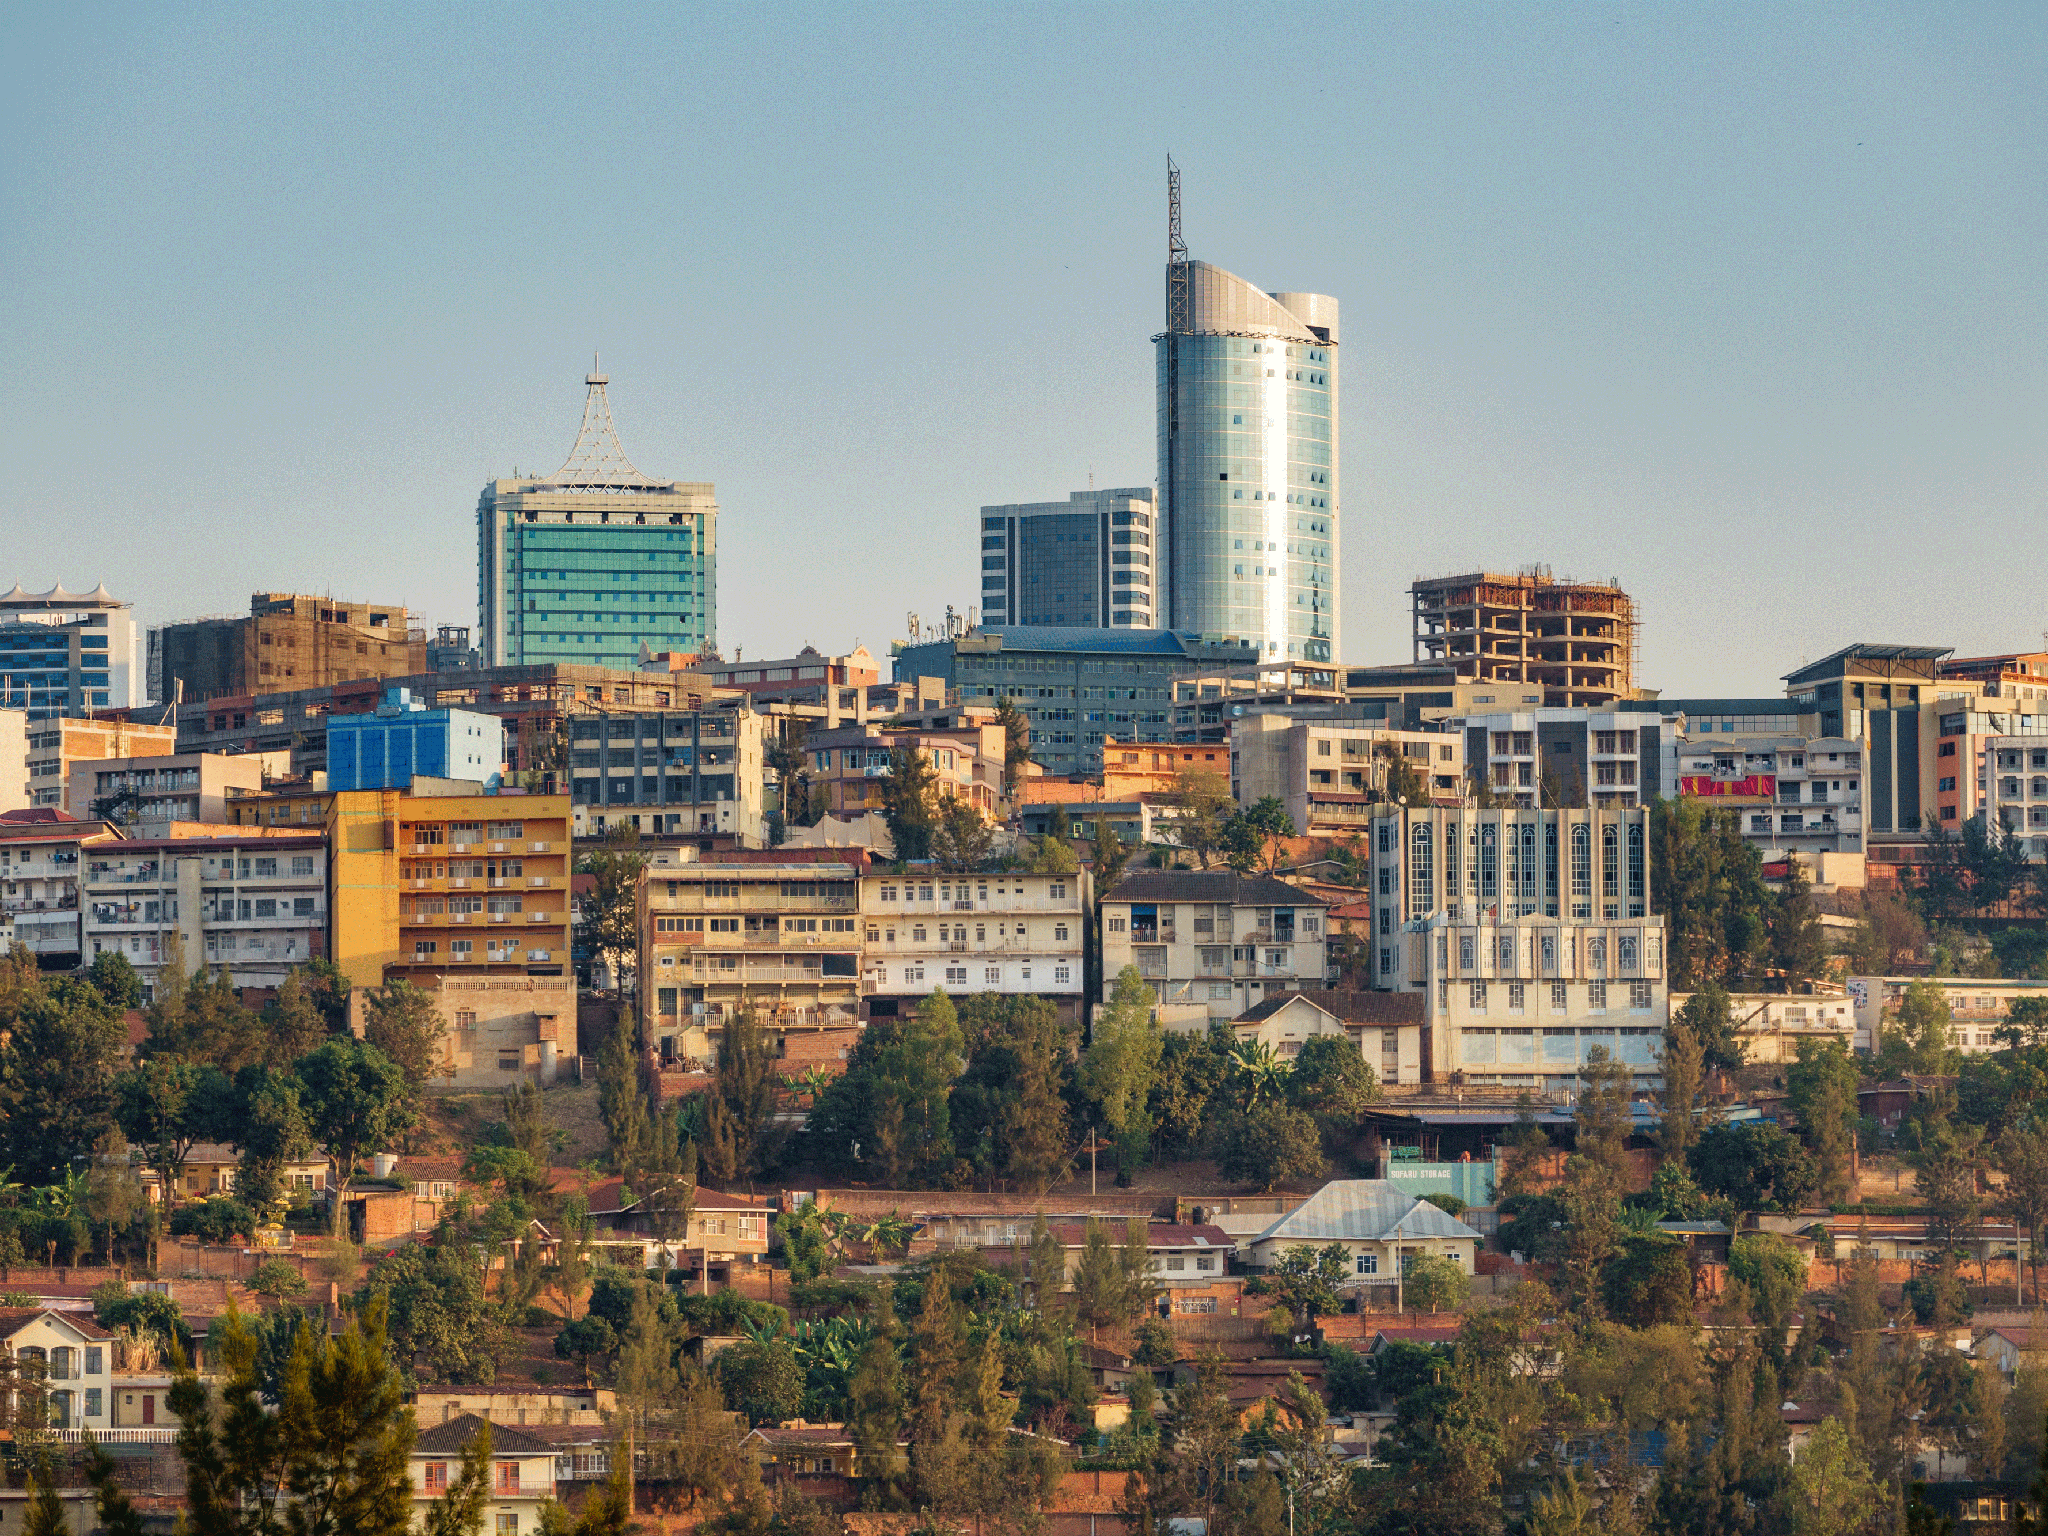 Downtown Kigali has seen a number of skyscrapers built in recent years